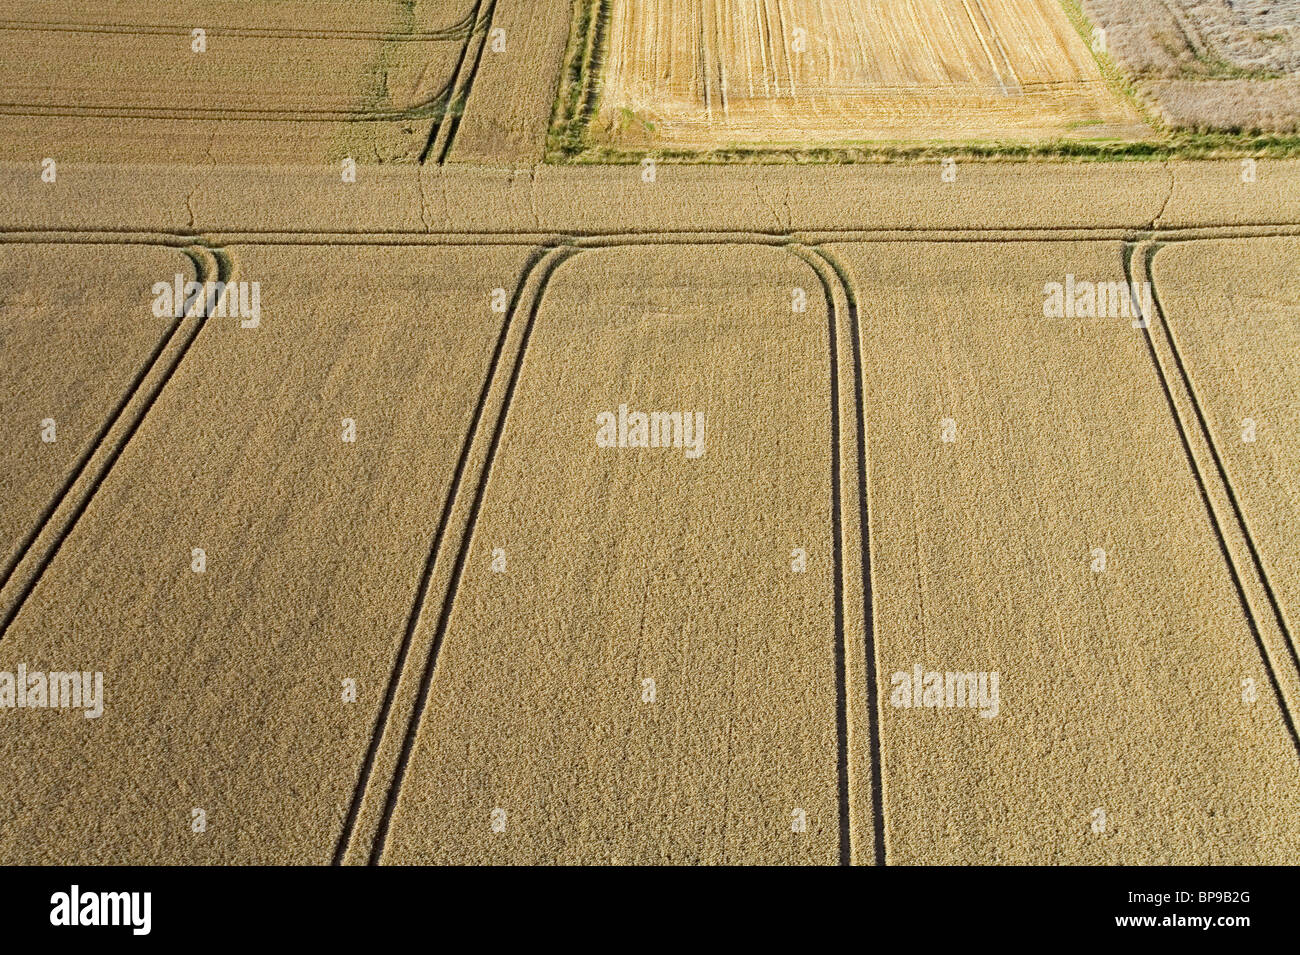 aerial view of fields, region Hanover, Lower Saxony, northern Germany Stock Photo